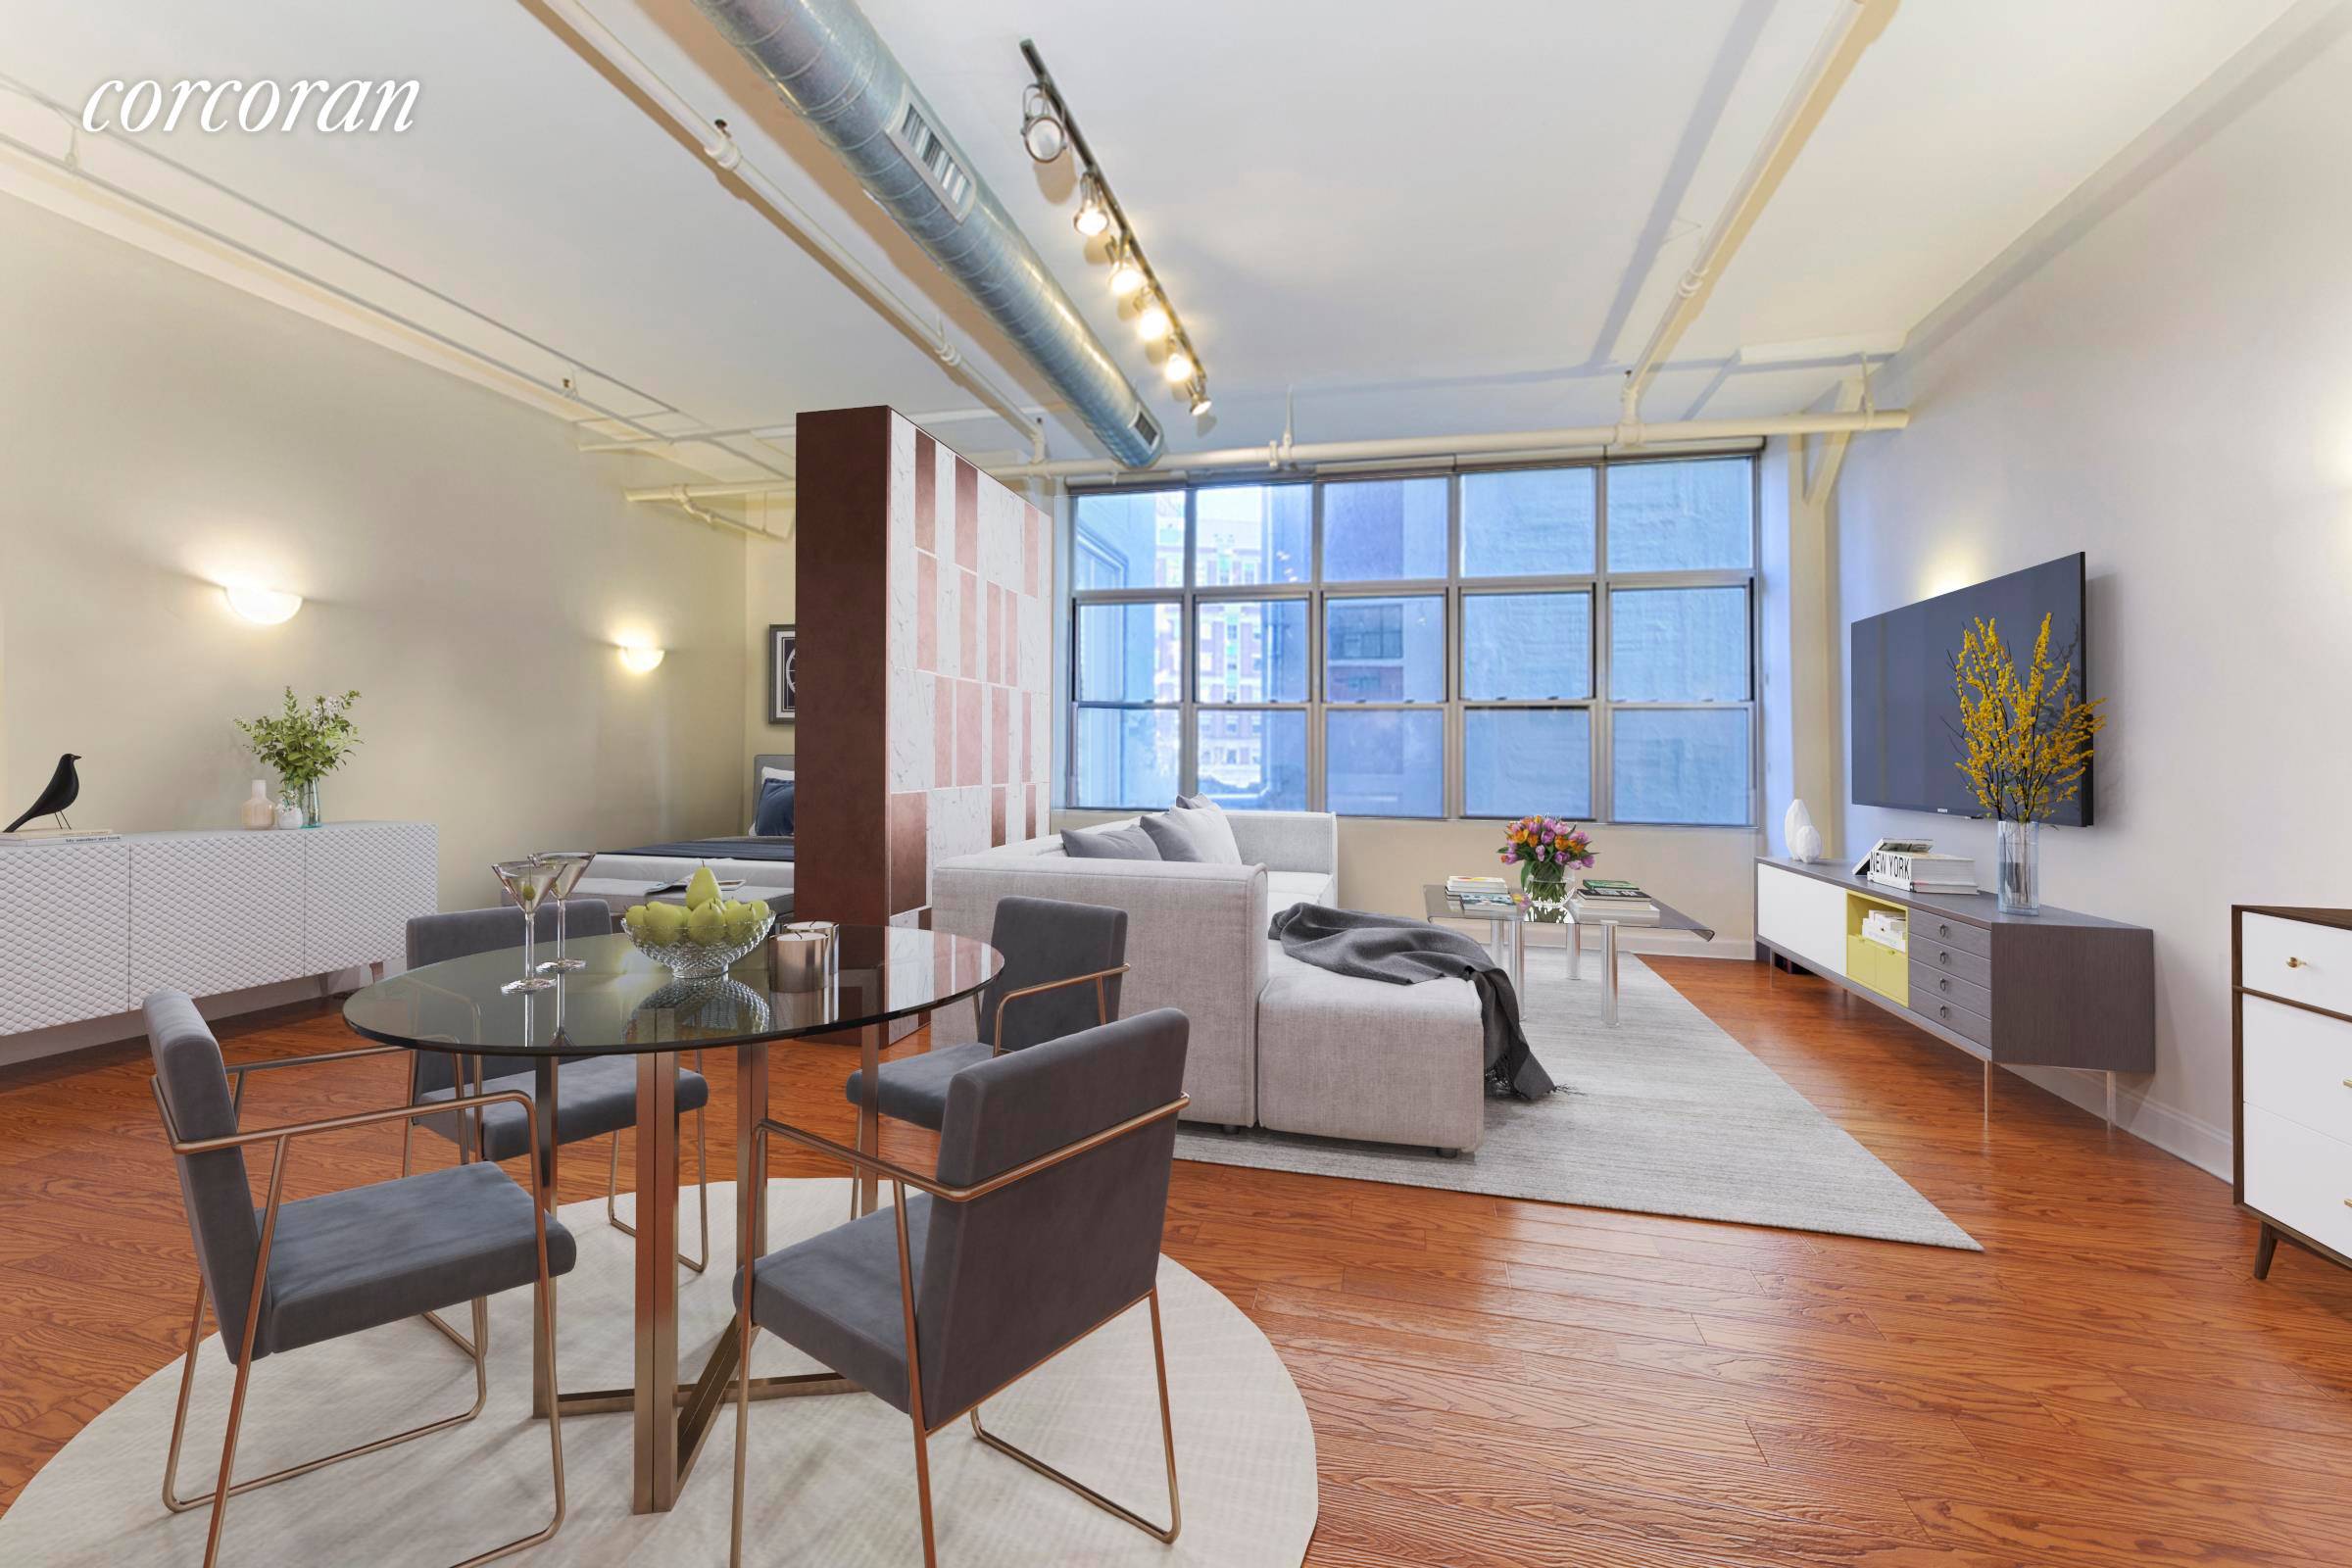 Quiet and sunny 834 square foot open loft in the Toy Factory Lofts located in the booming neighborhood of Downtown Brooklyn.